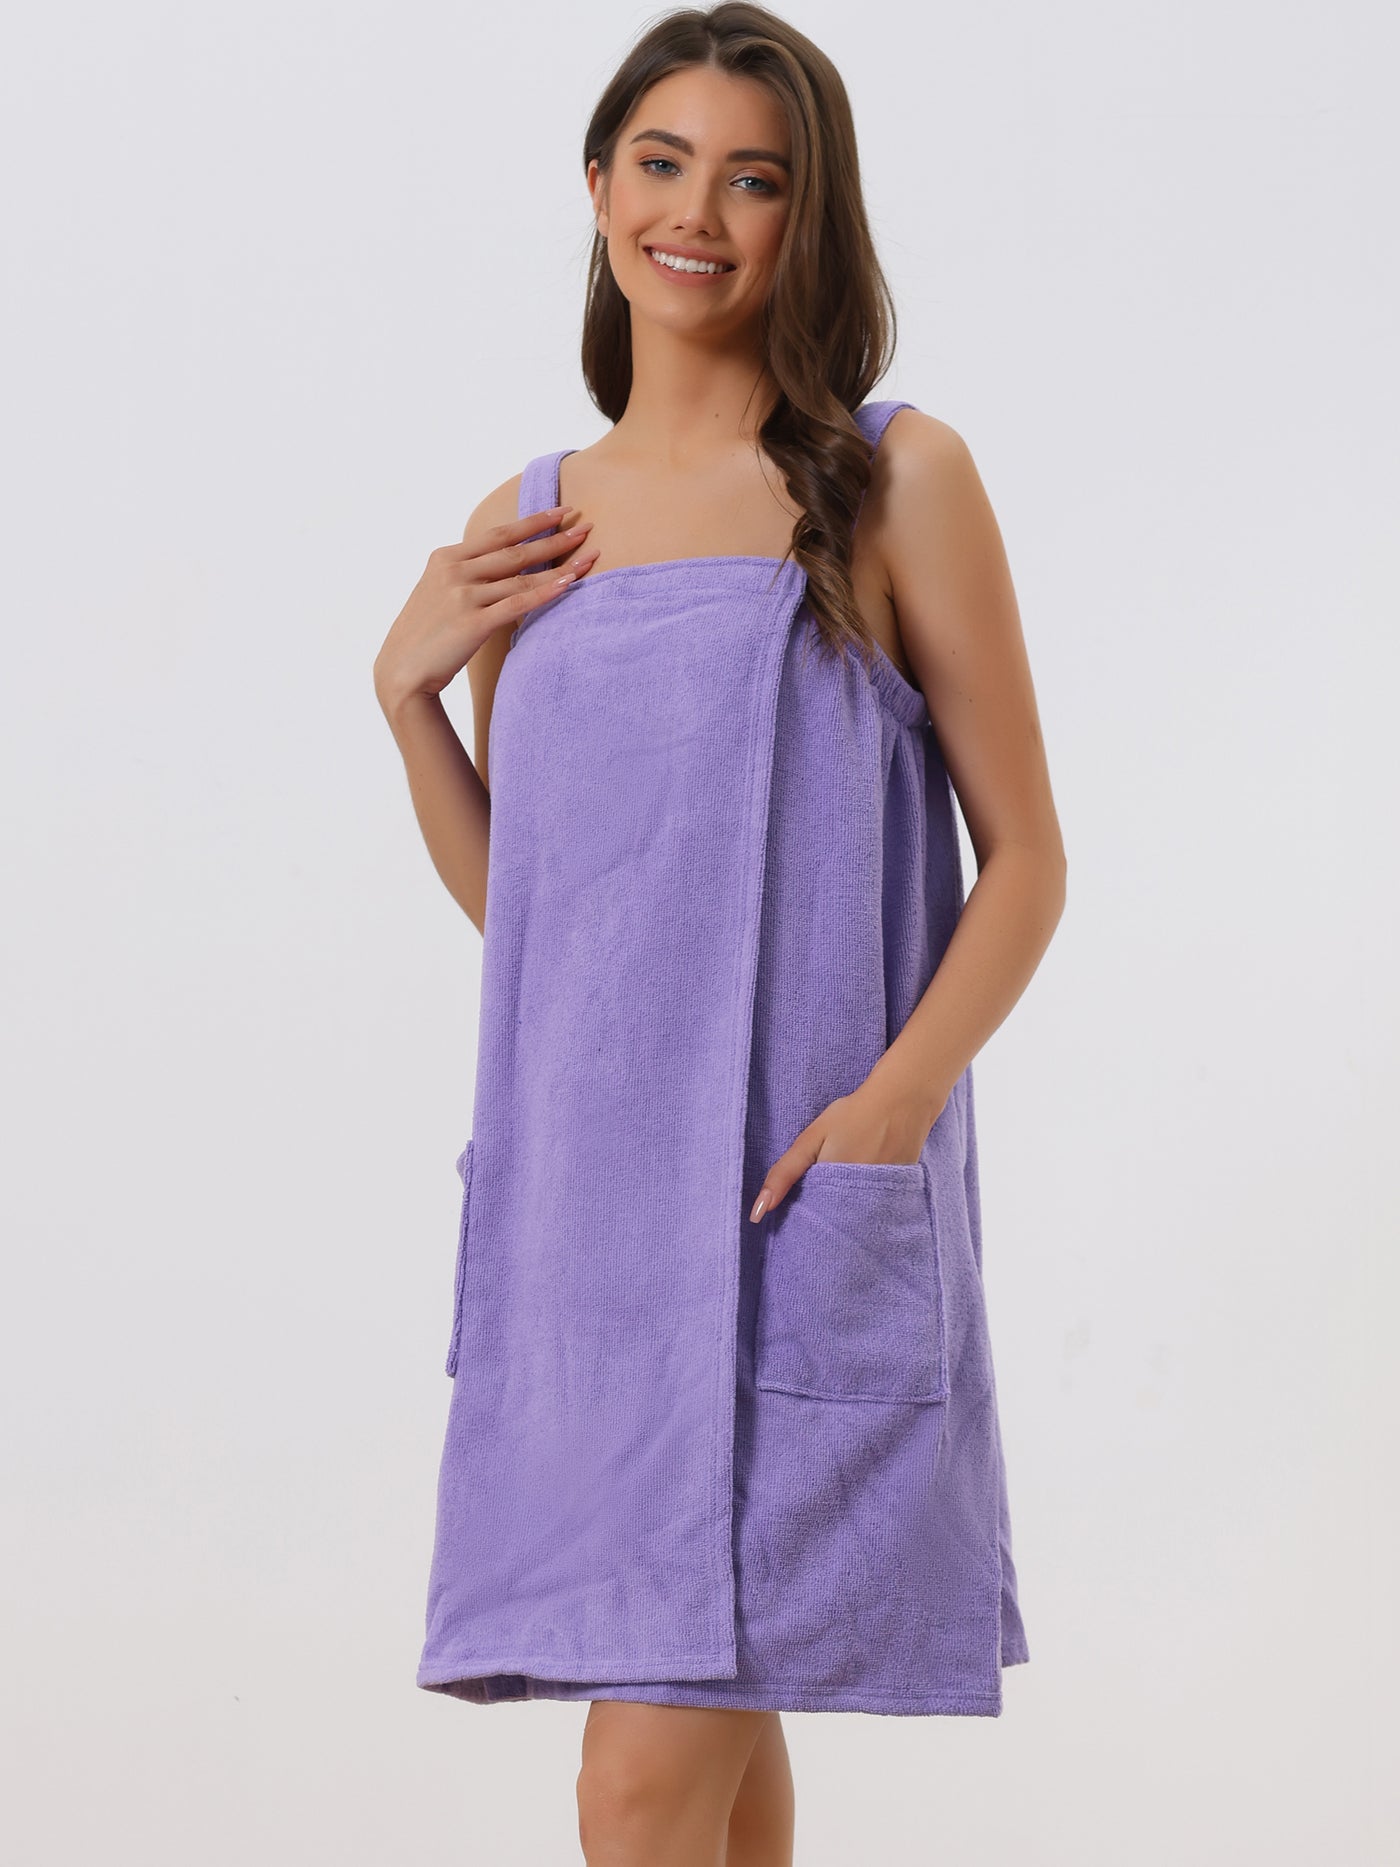 Bublédon Womens Towel Wrap Bathrobe Spa Towels Robe with Adjustable Closure for Gym Shower